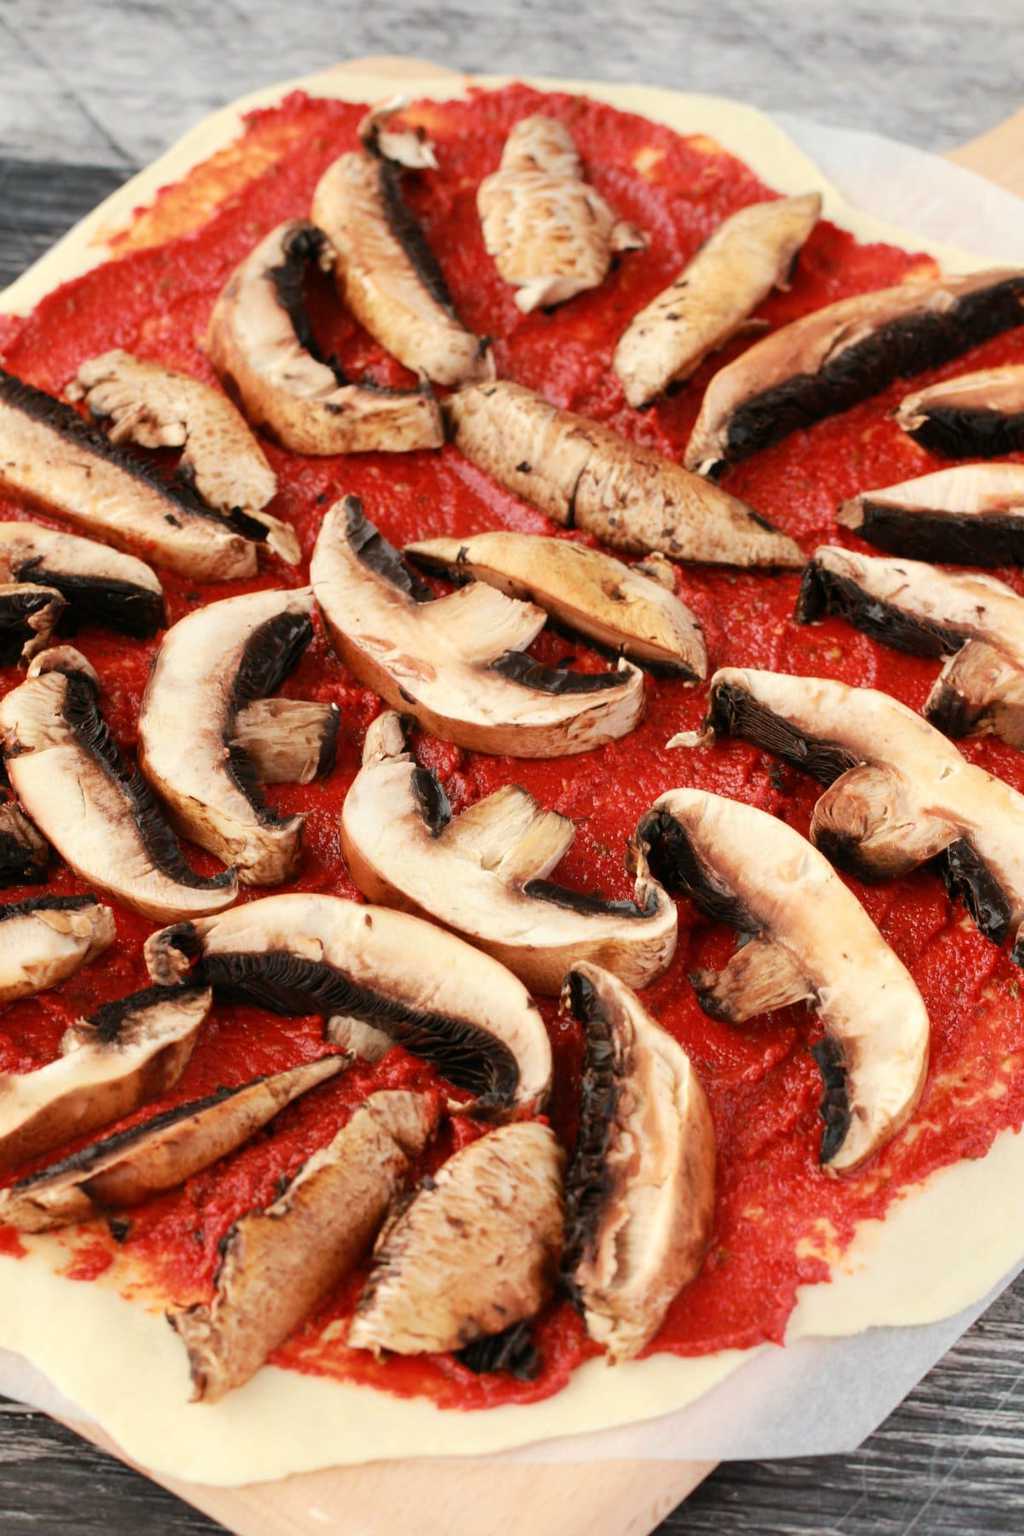 A pizza base with tomato sauce and mushrooms ready to go into the oven